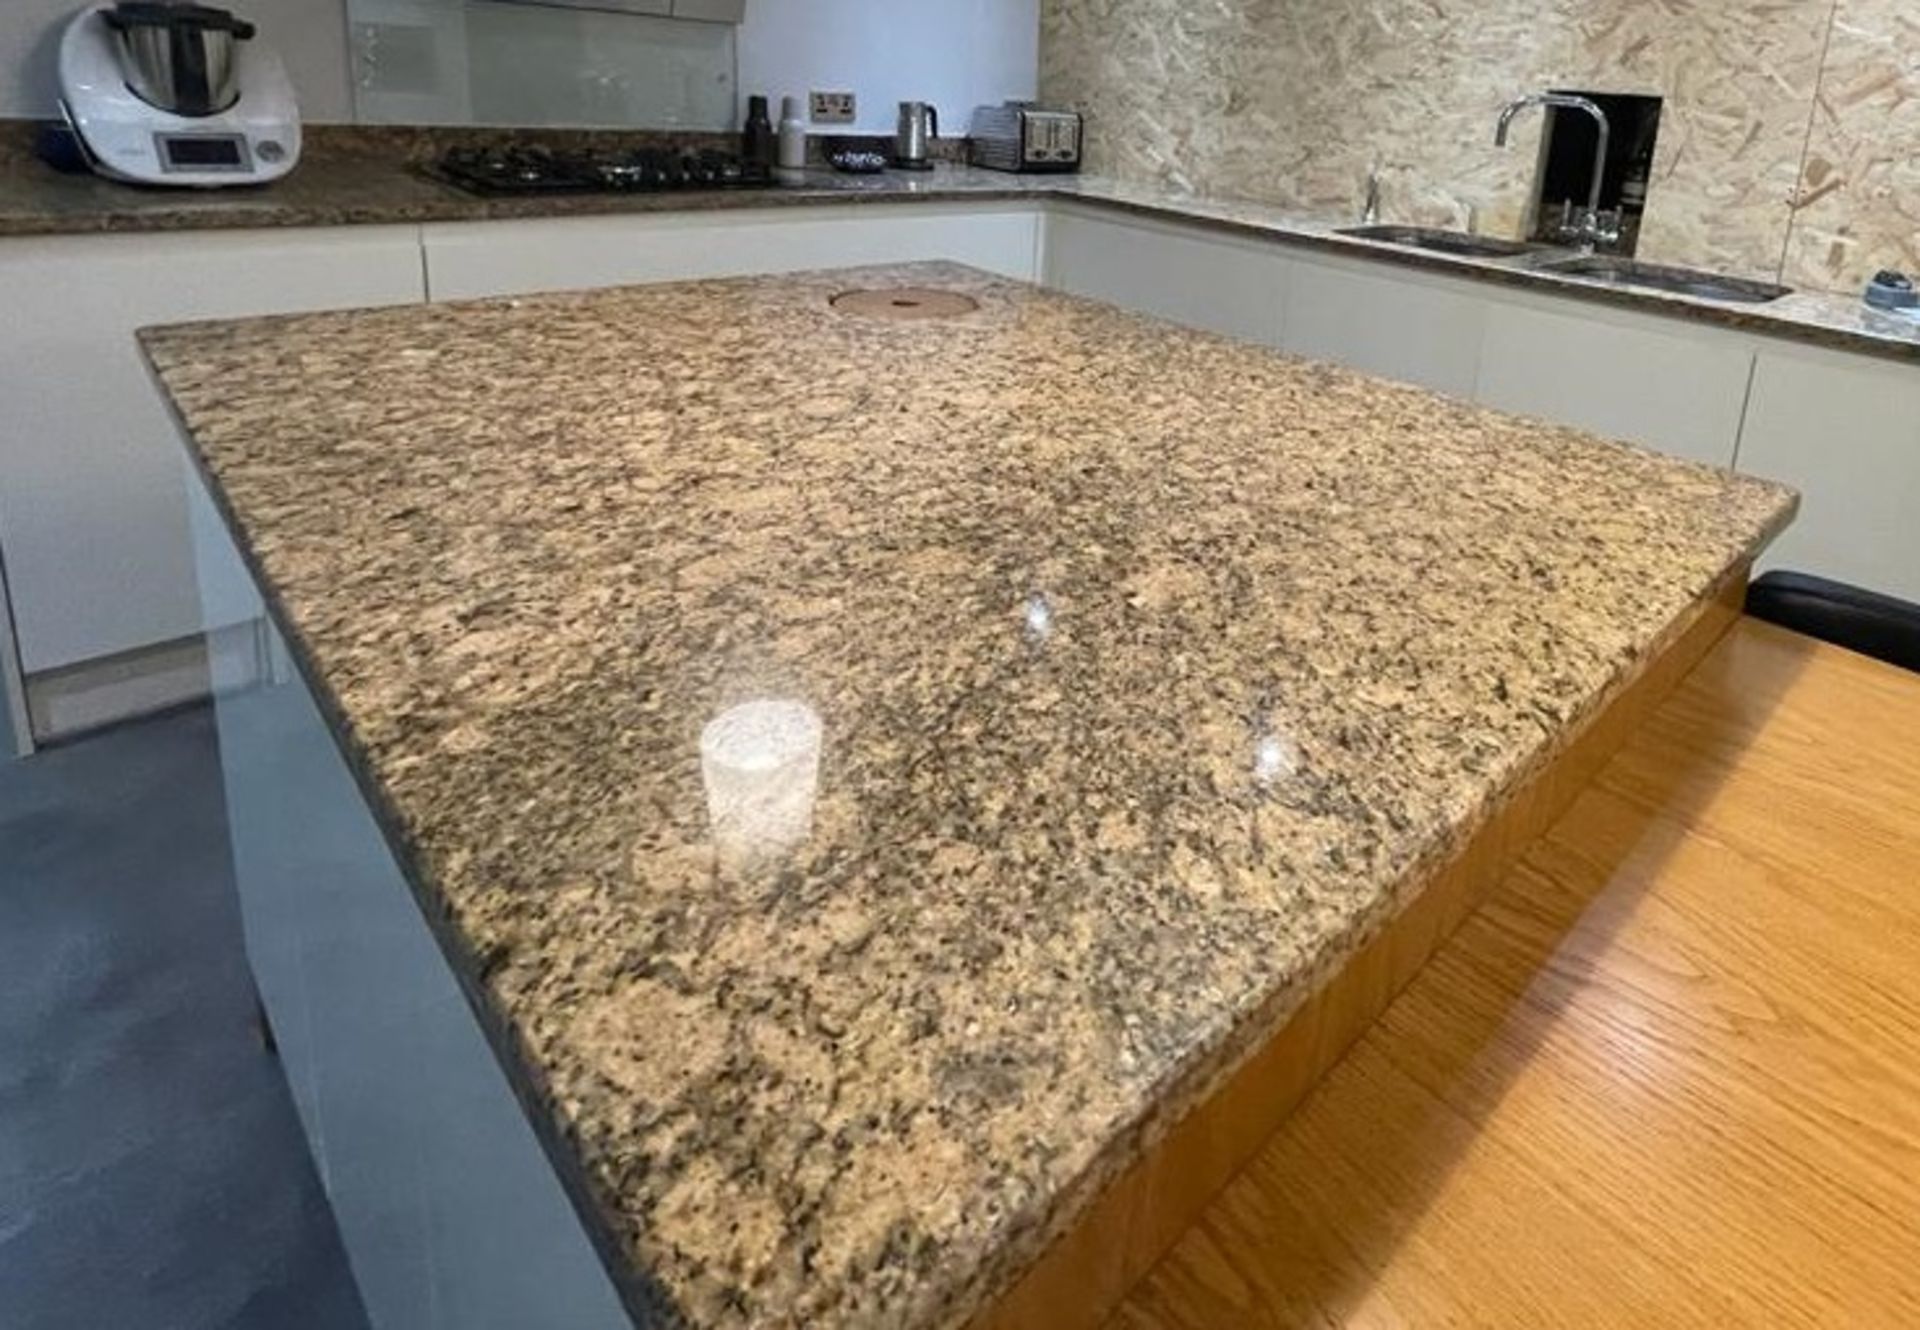 1 x Stunning PARAPAN Handleless Fitted Kitchen with Neff Appliances, Granite Worktops & Island - Image 21 of 126